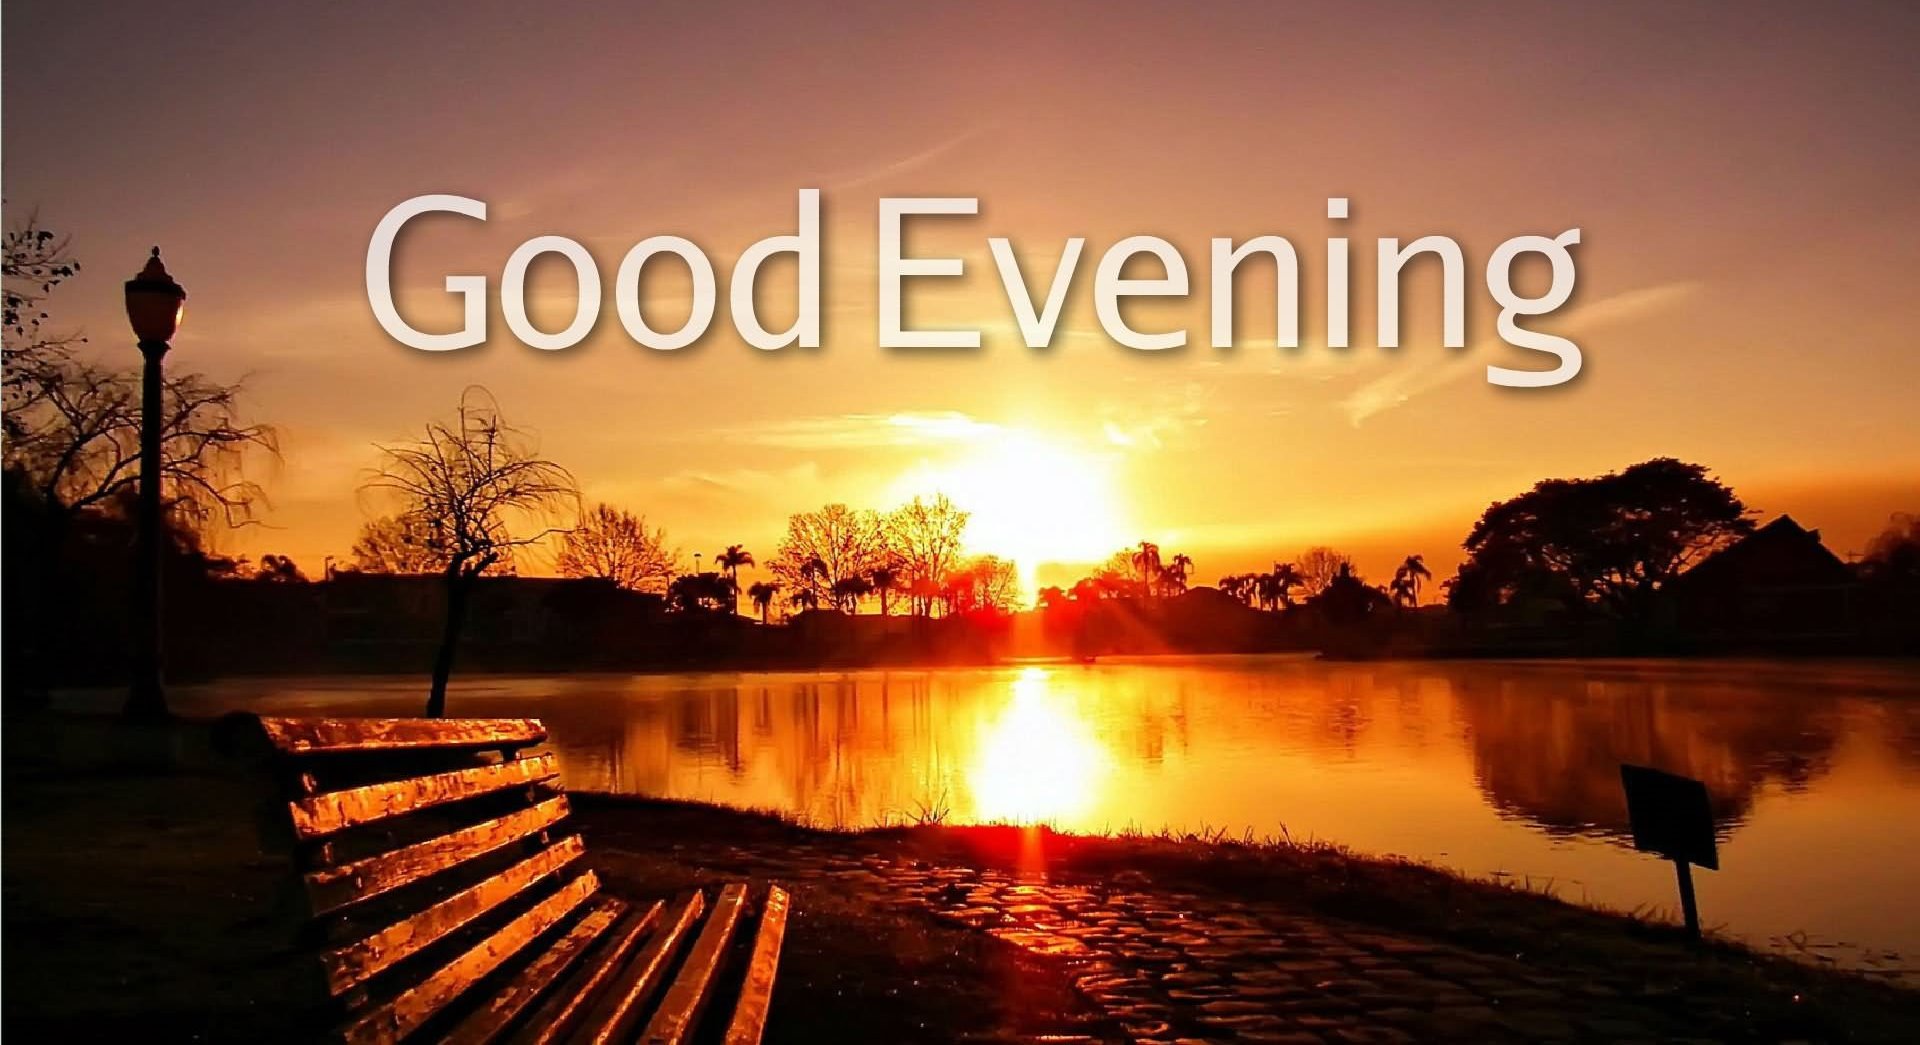 Good Evening Wishes Wallpaper - Download Hd Good Evening Wishes ...